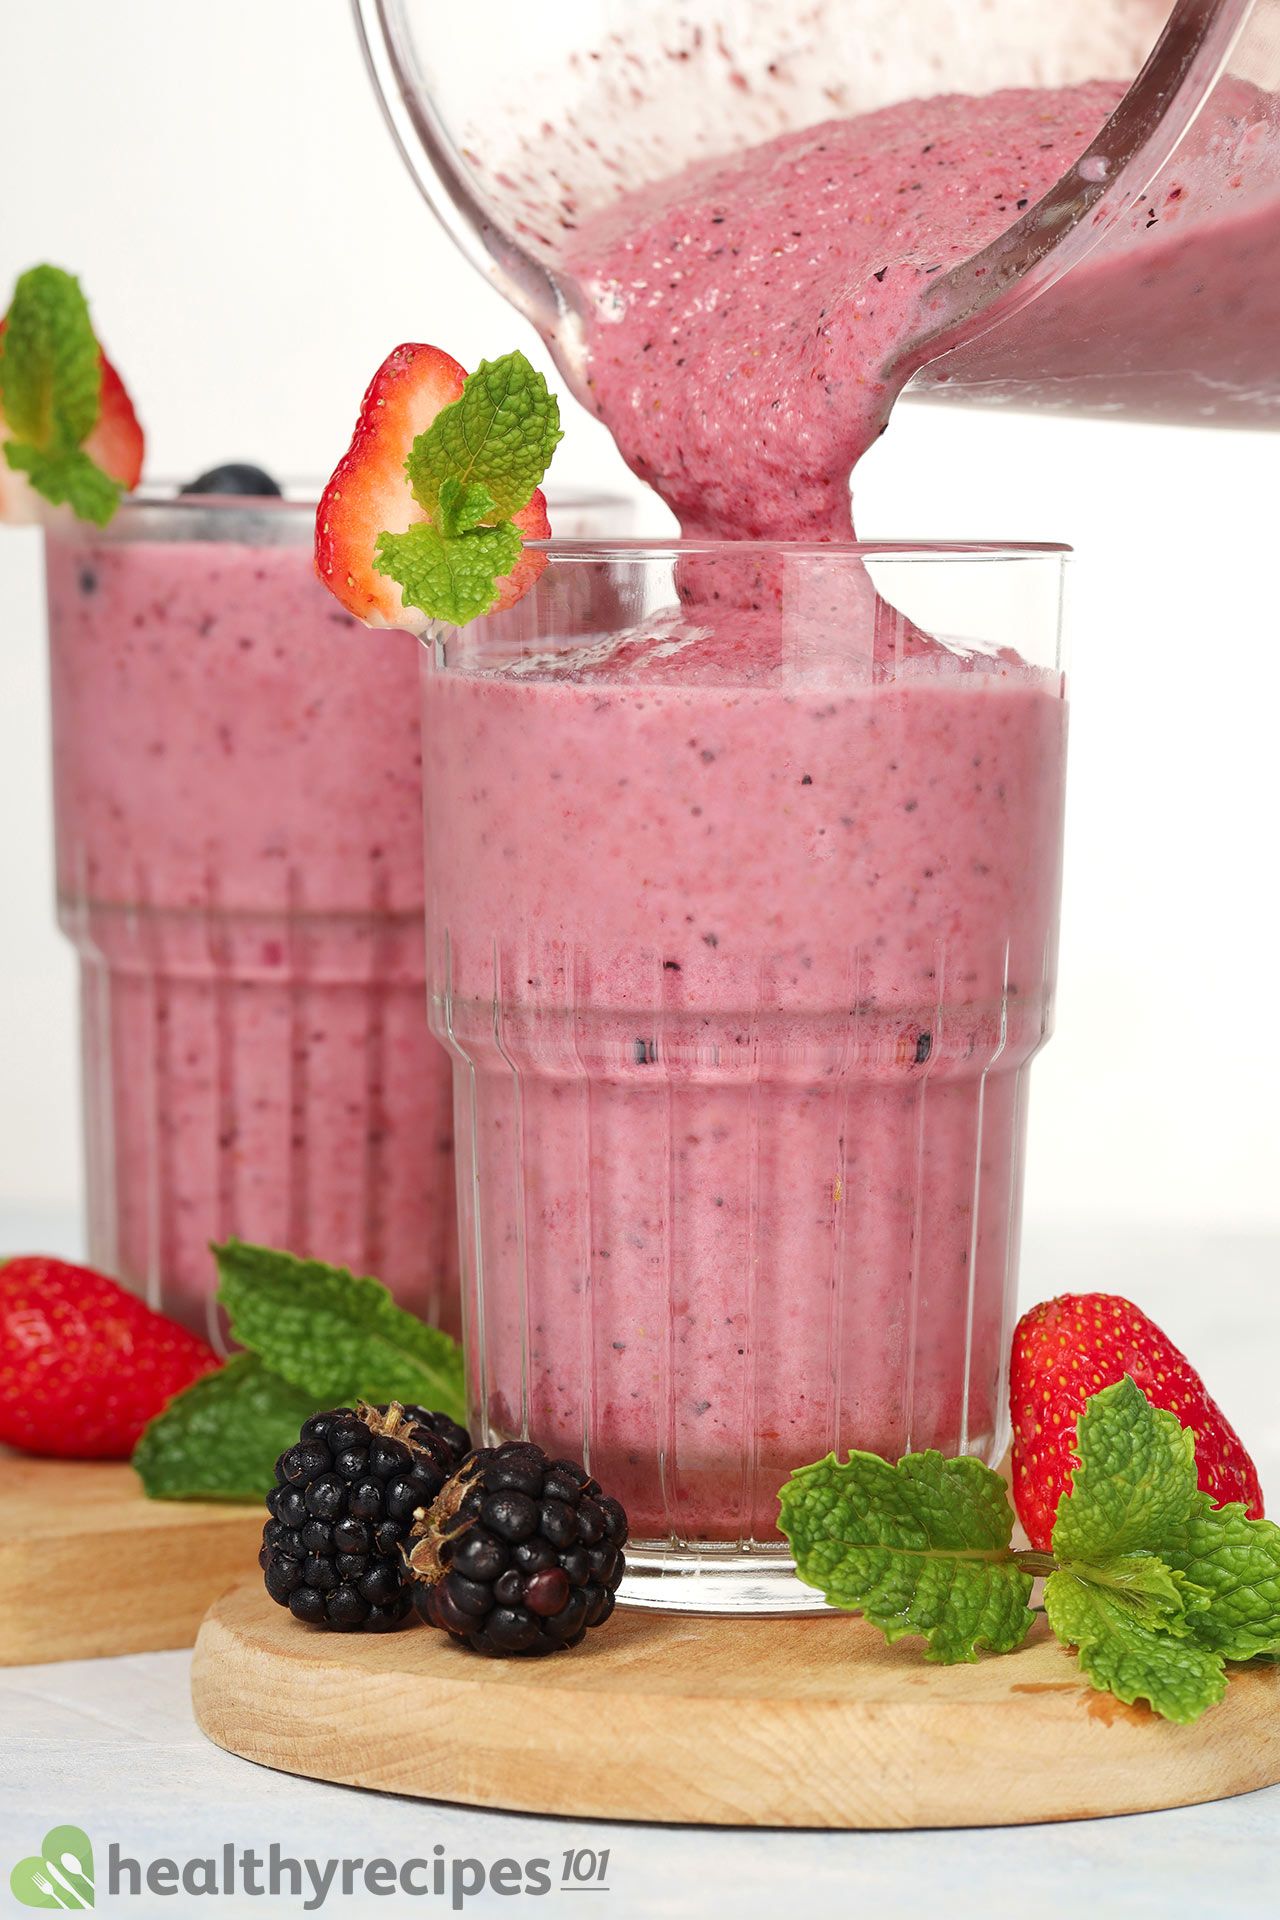 Our Mixed Berry Smoothie’s Benefits